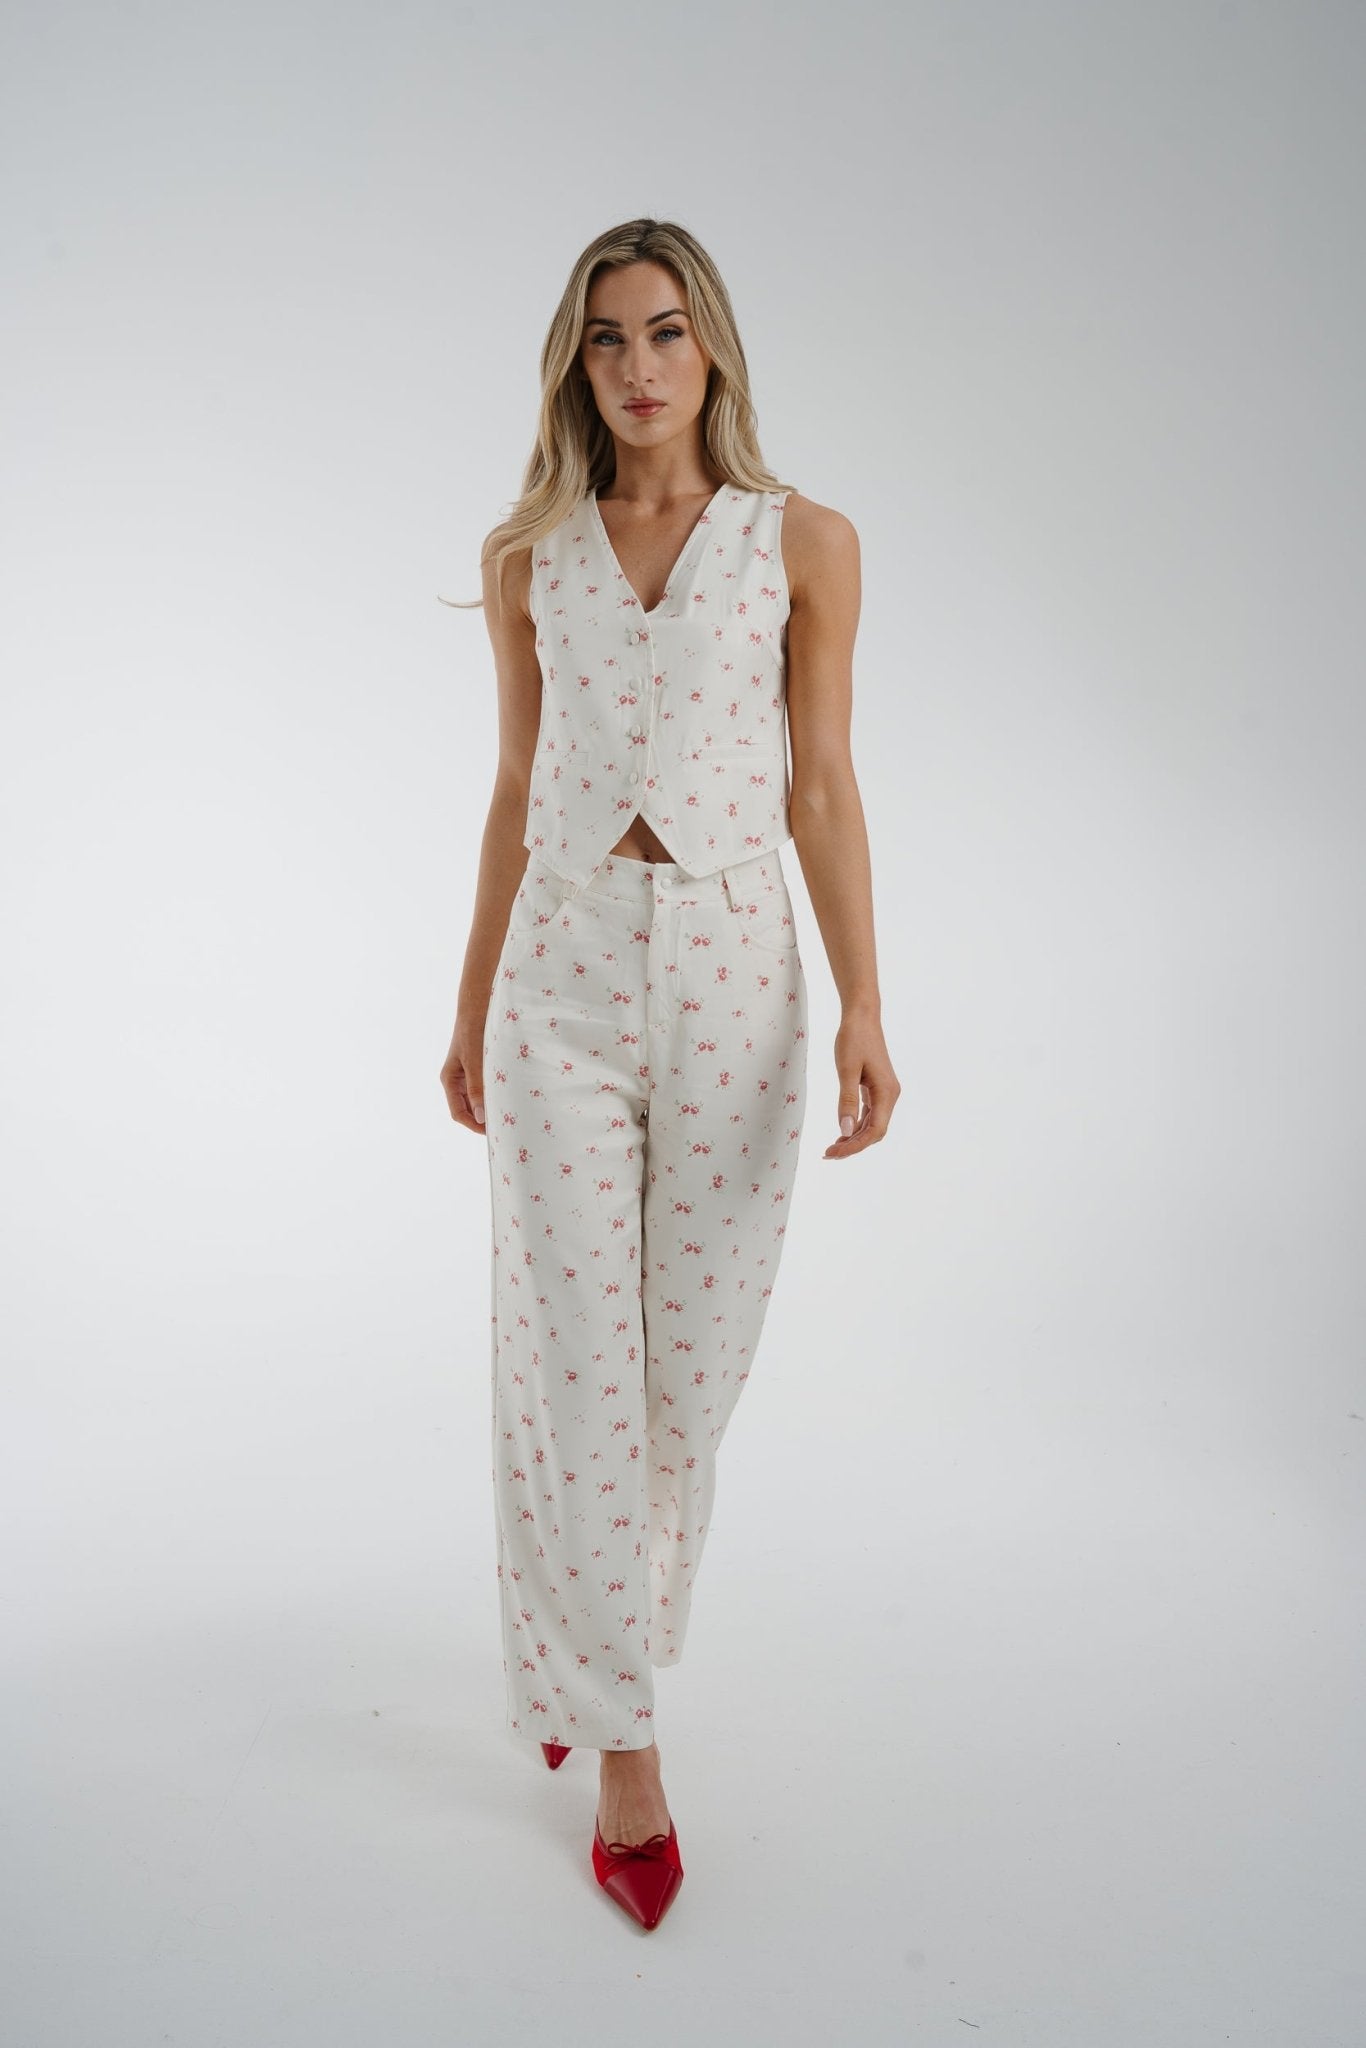 Elsa Floral Trousers In Pink Mix - The Walk in Wardrobe